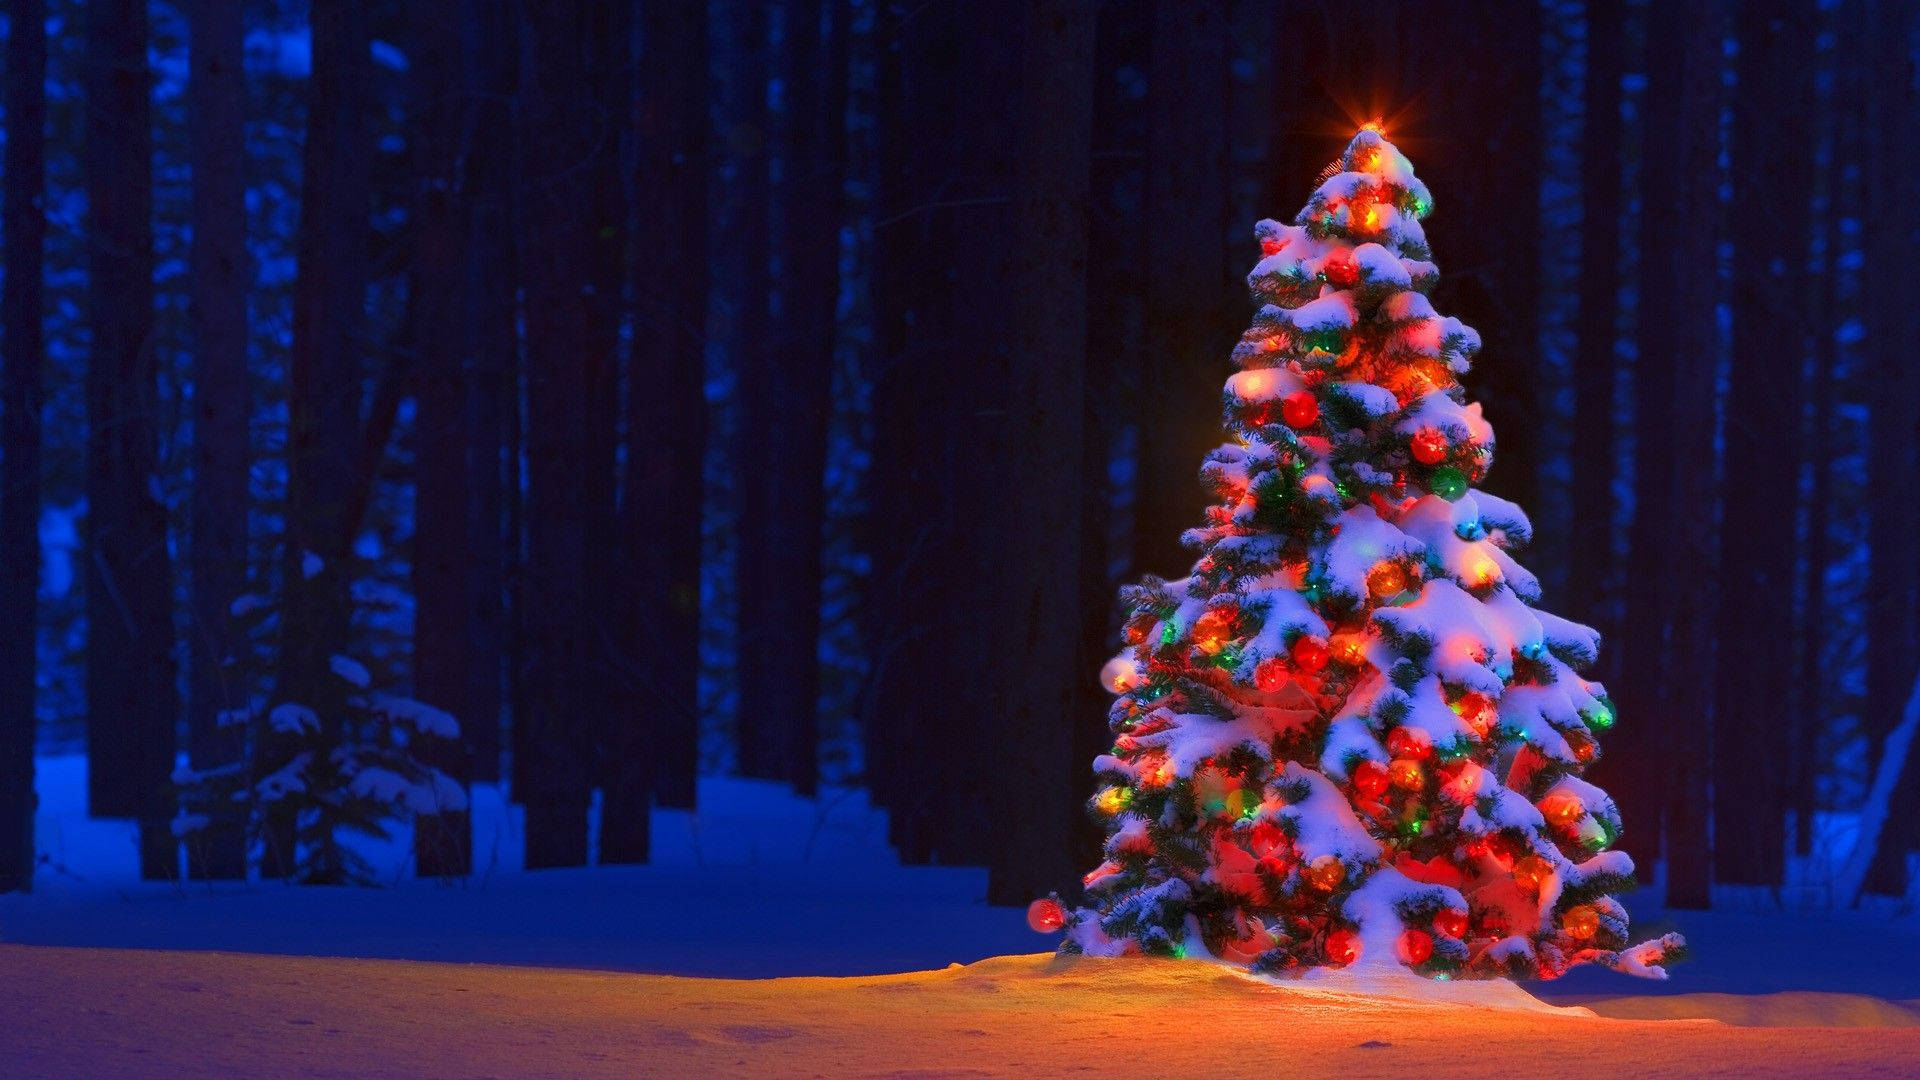 A Colorful Christmas Tree in a Winter Wonderland Wallpaper